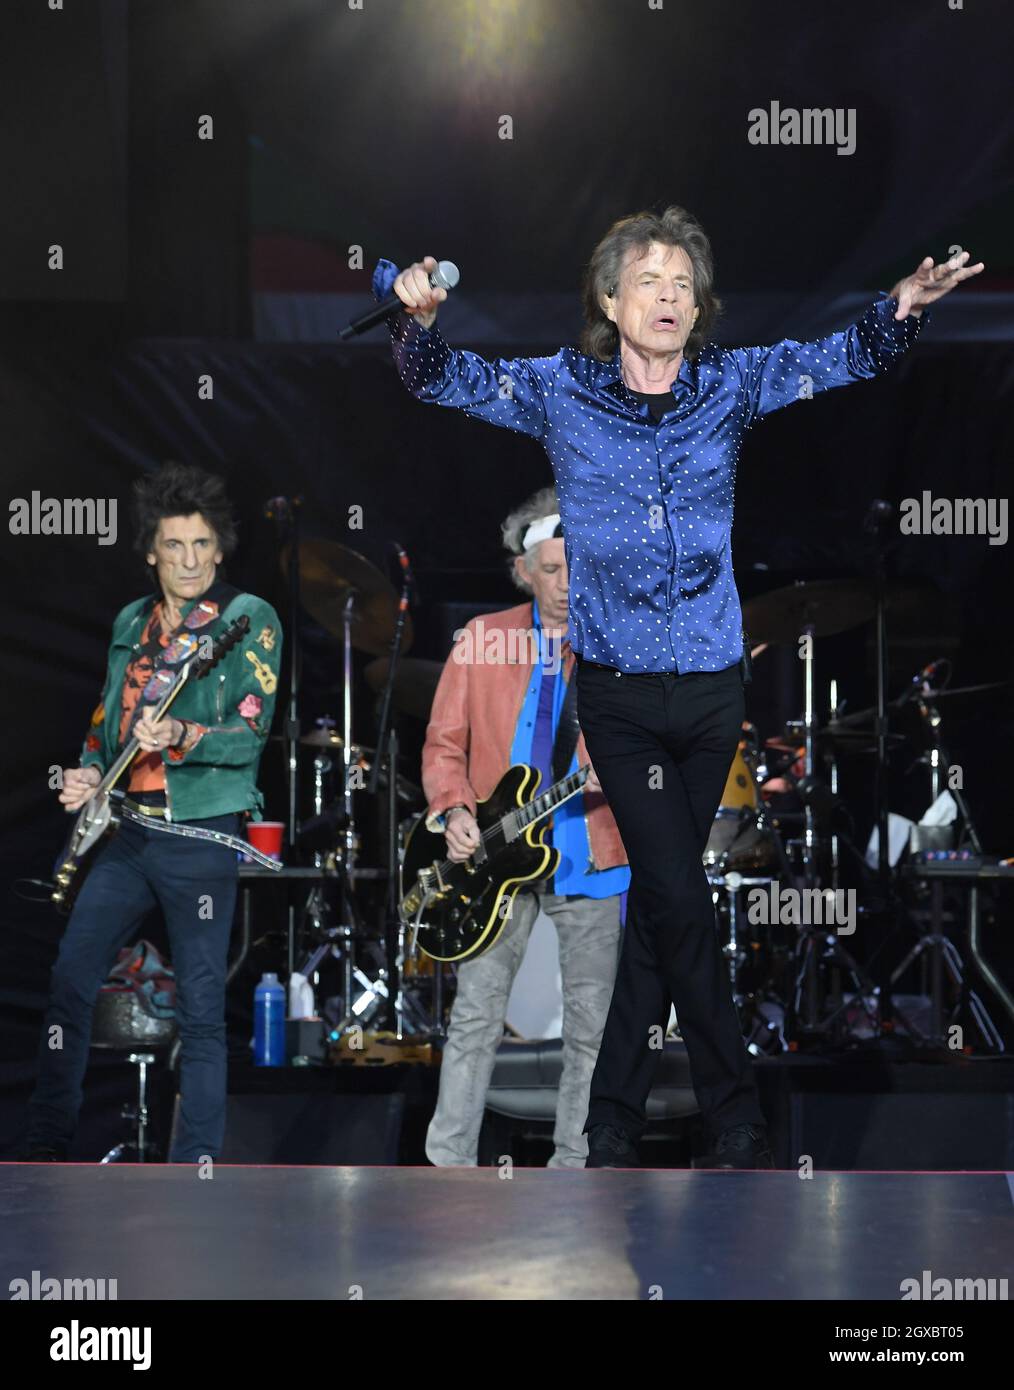 Ronnie Wood, Keith Richards and Mick Jagger of The Rolling Stones perform on stage at the Principality Stadium in Cardiff on June 15, 2018 Stock Photo